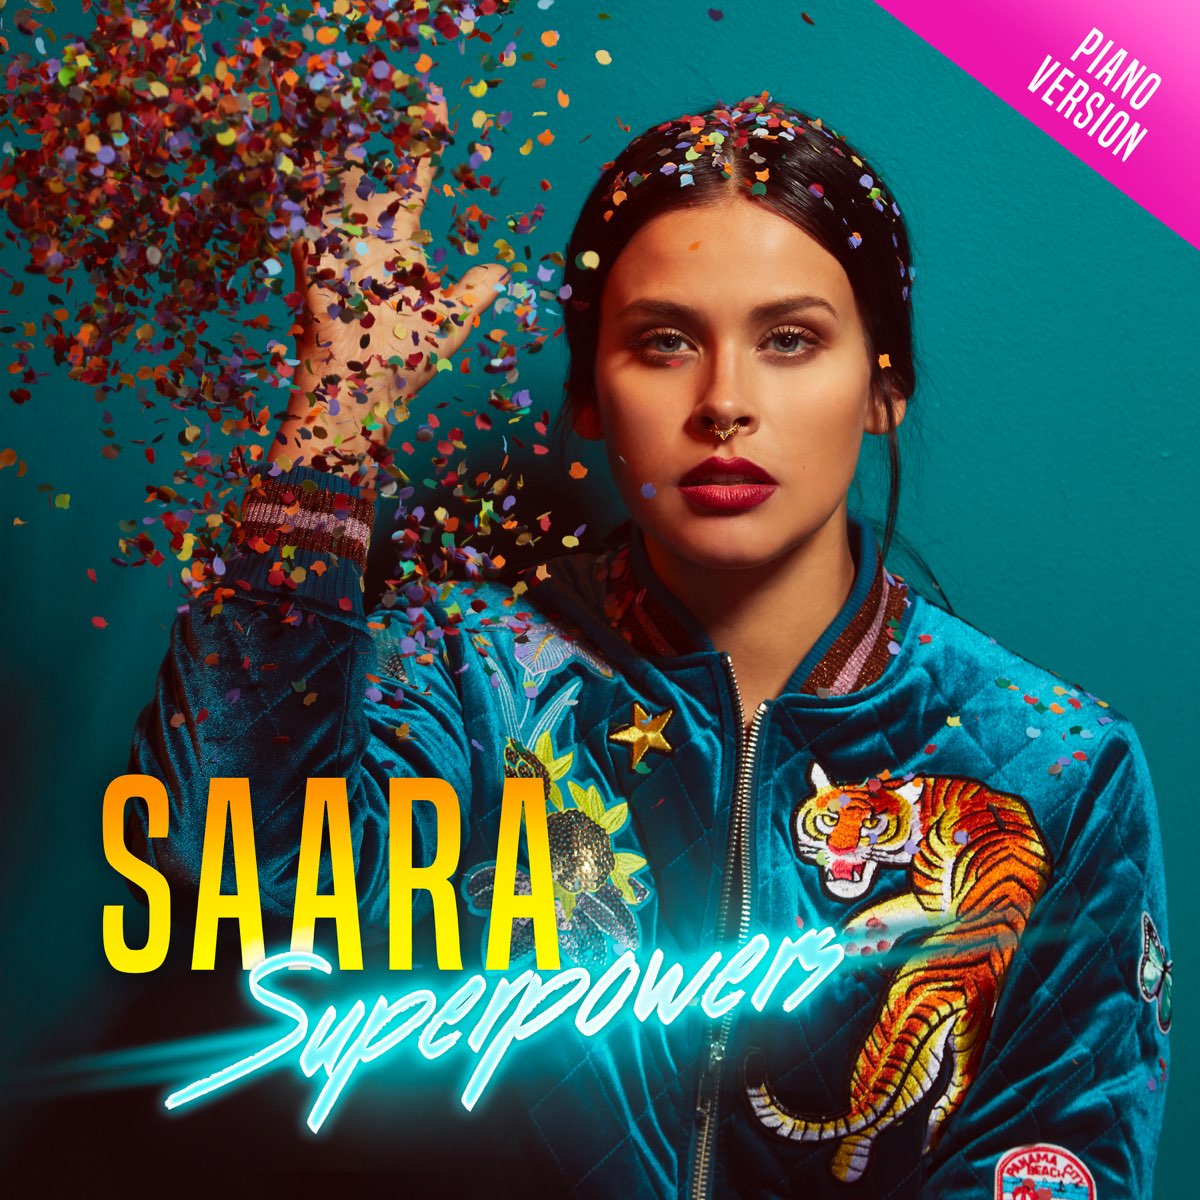 Superpowers (Piano Version) - Single by SAARA on Apple Music